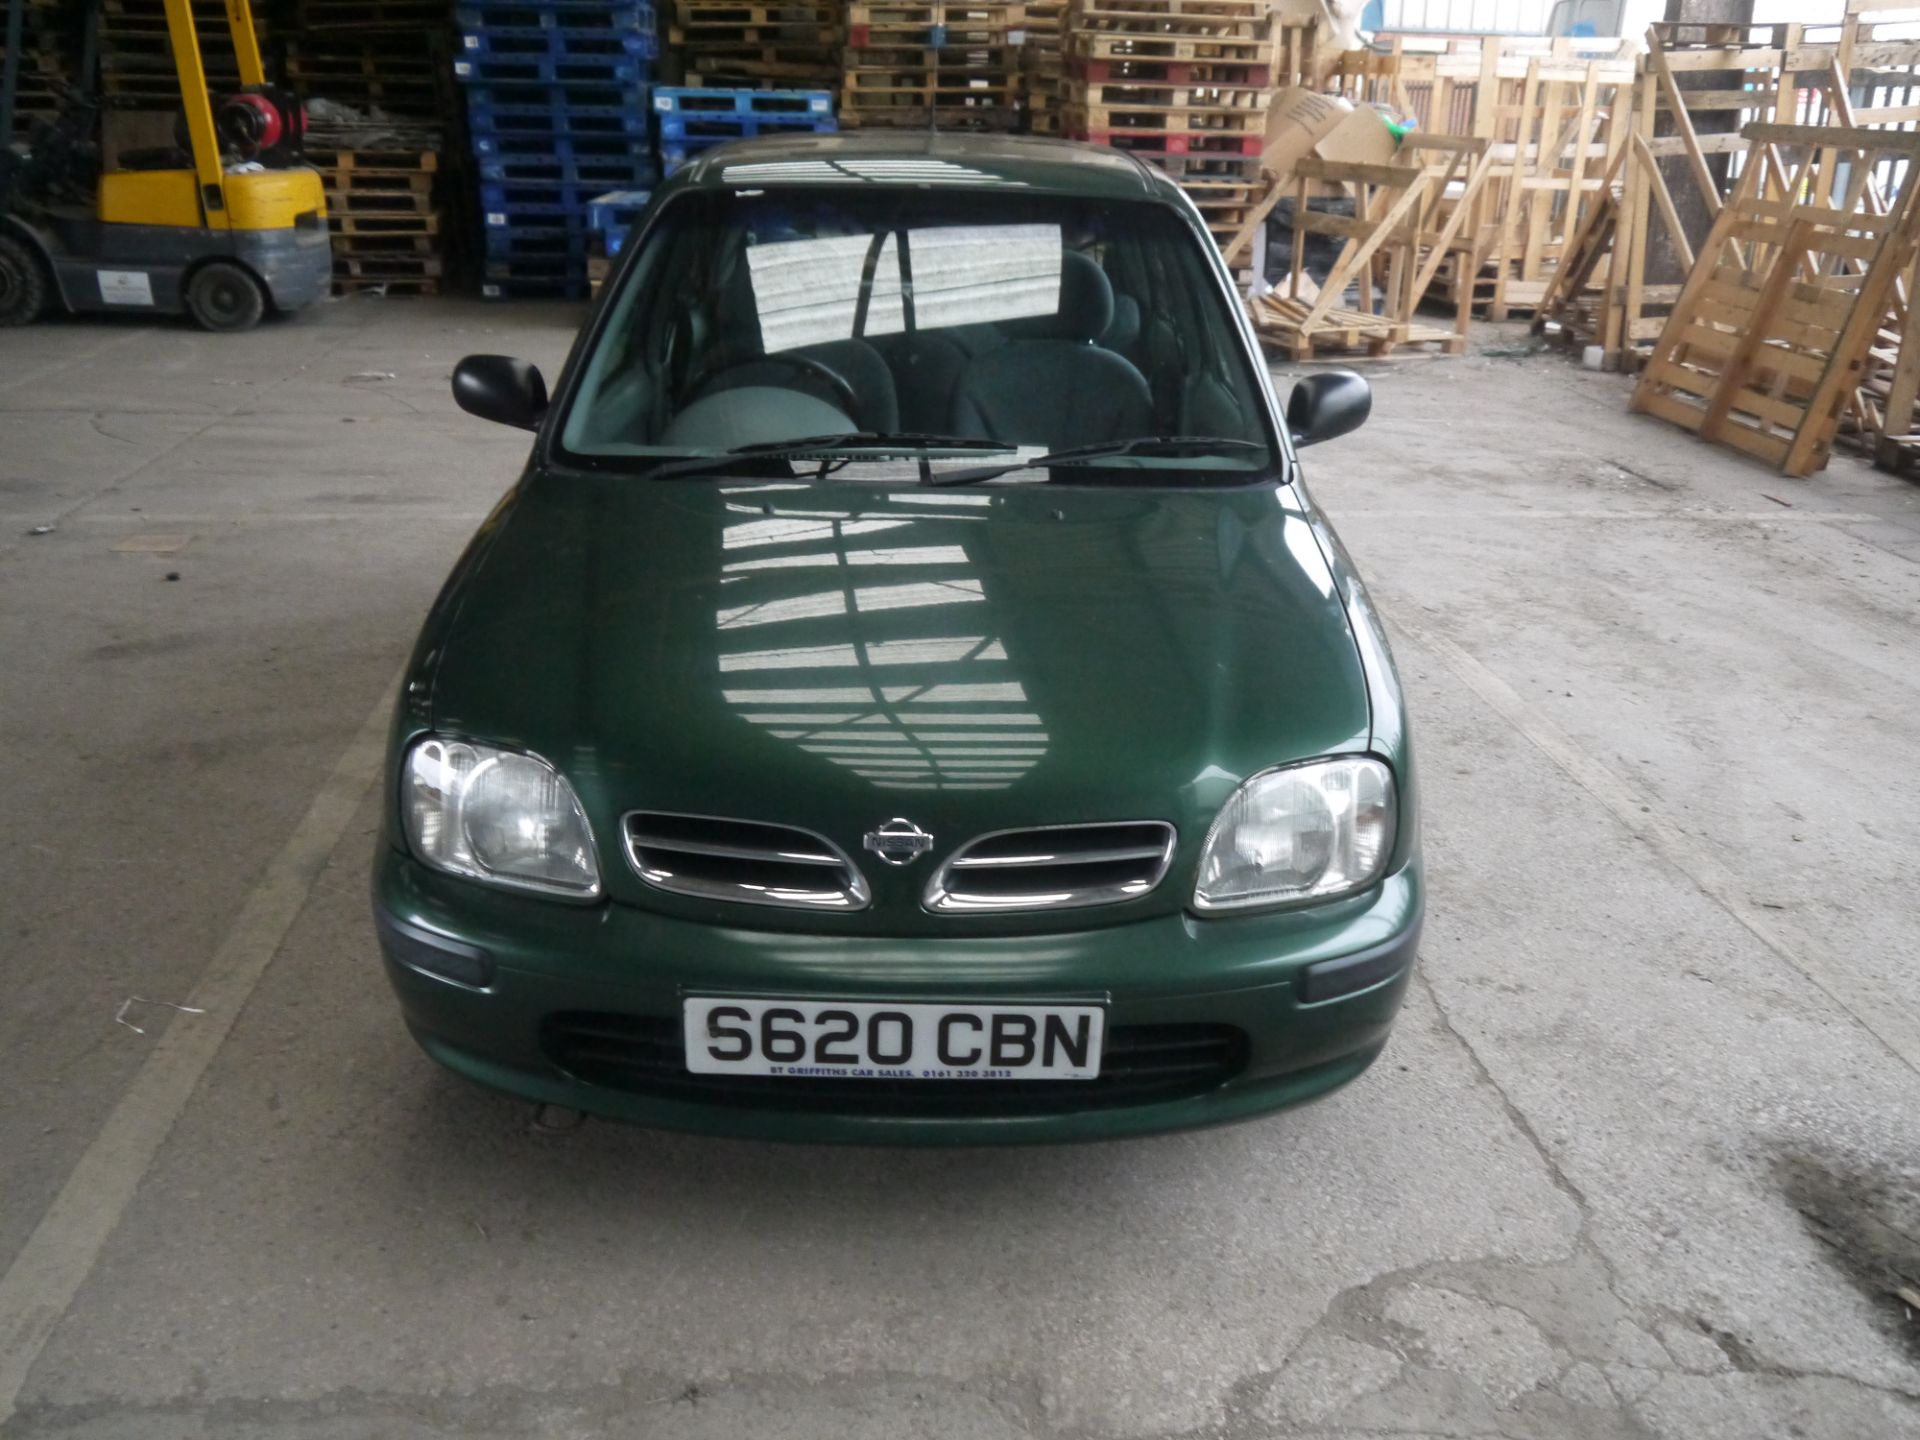 S Reg Nissan Micra, 5 door hatch back, 85,000miles, 1ltr Petrol.  In excellent condition for age.